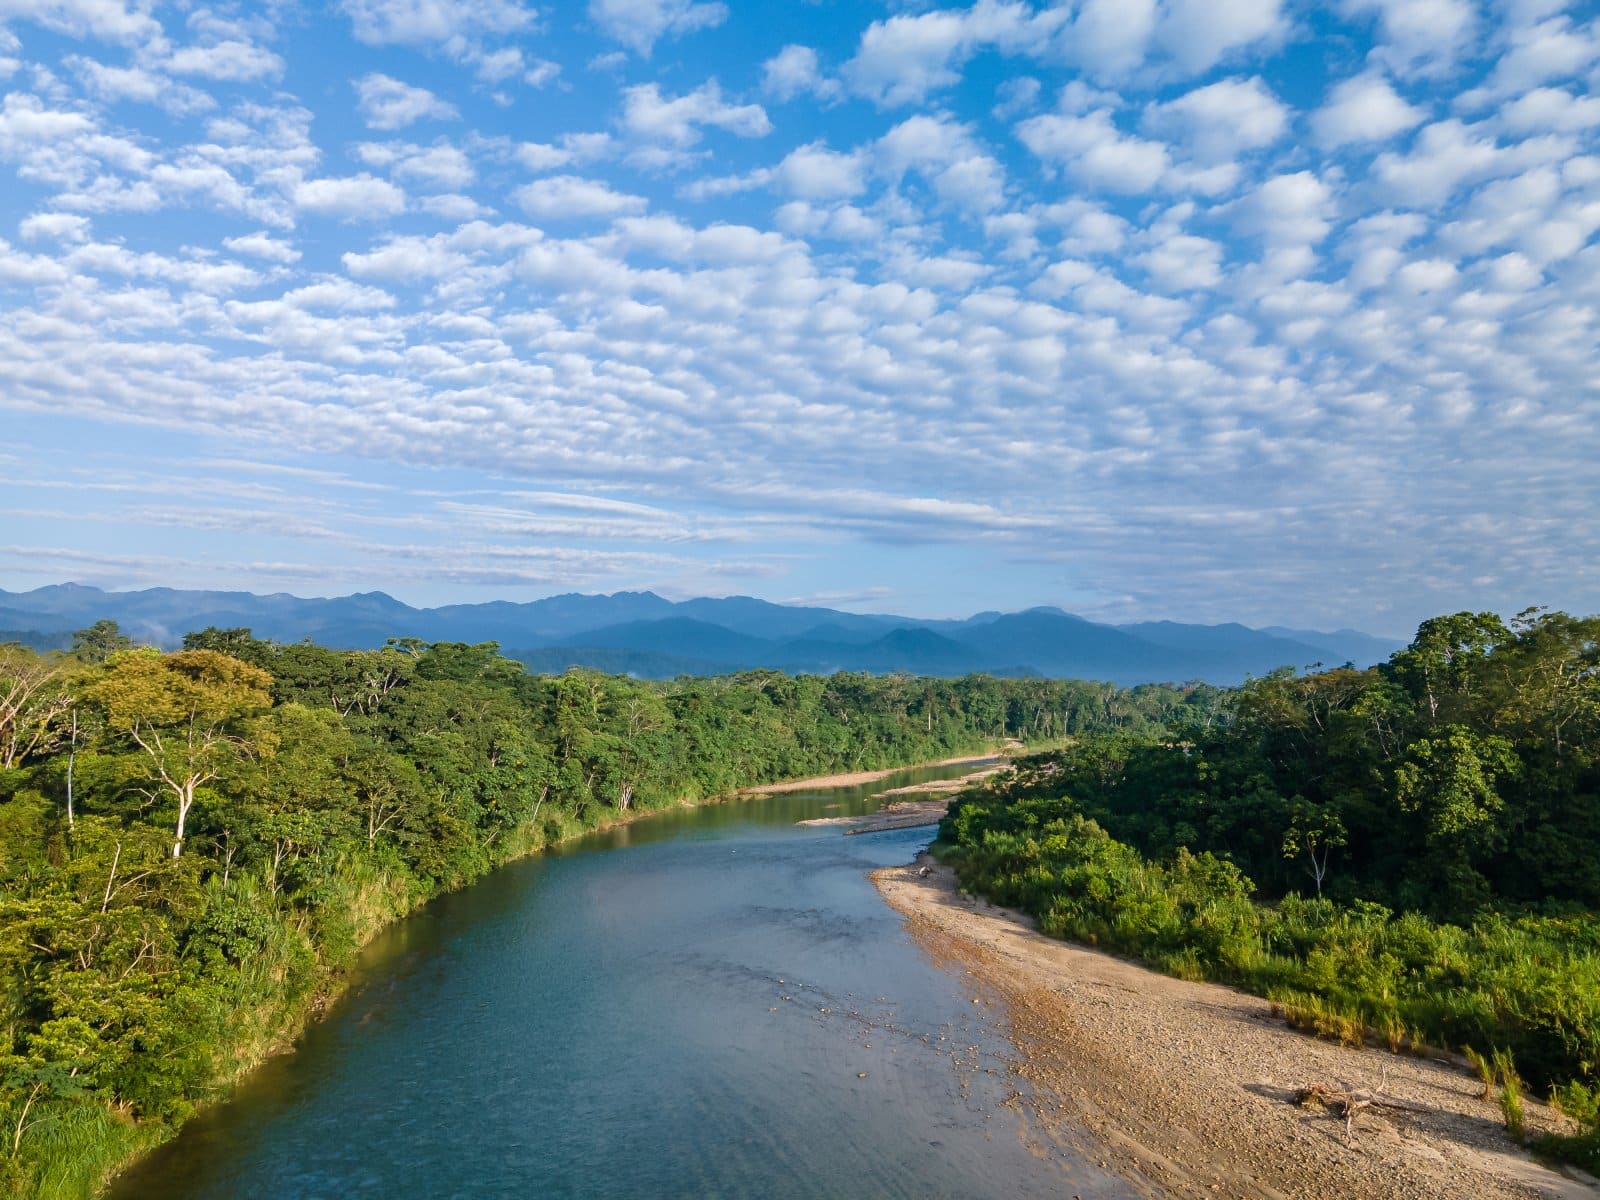 <p class="wp-caption-text">Image Credit: Shutterstock / Wirestock Creators</p>  <p><span>Tena, known as the “Cinnamon Capital” of Ecuador, is a lesser-known entry point to the Amazon Rainforest, offering a more intimate setting for shamanic exploration. The region is home to several indigenous tribes, such as the Kichwa, who maintain a deep connection to their ancestral lands and traditions. Shamanic tours here often involve cleansing rituals, traditional music, and storytelling, providing insights into the spiritual relationship between the people and the rainforest.</span></p>